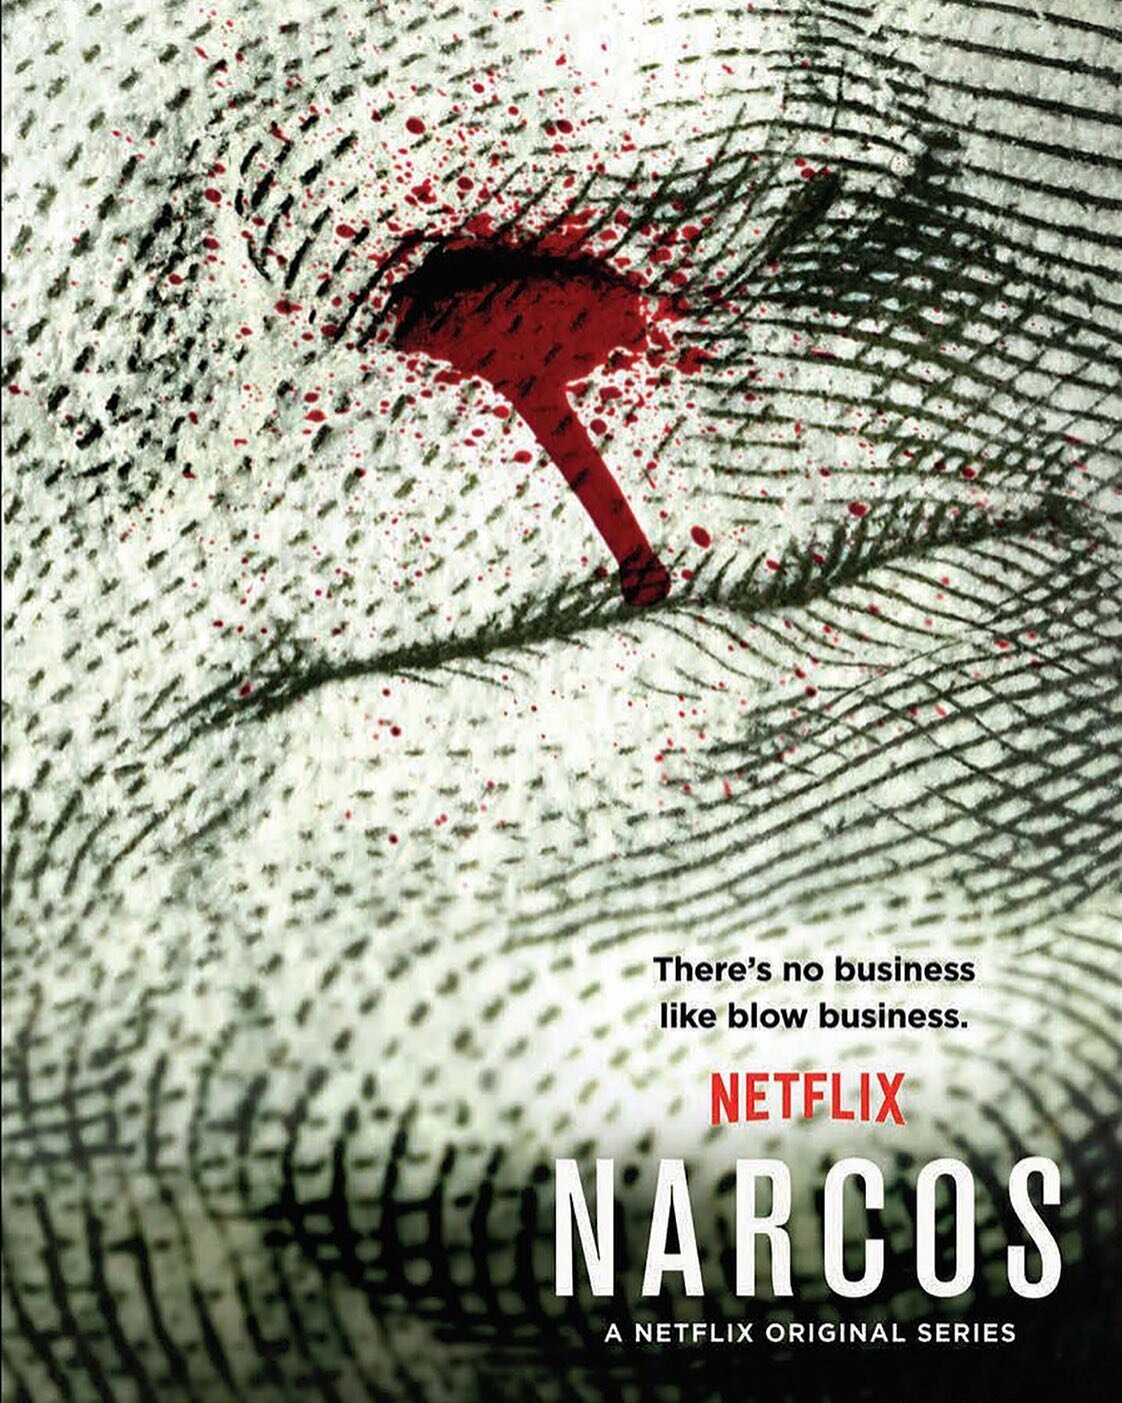 Throwback. One of my favorite shows. Got the chance to work on it. @netflix @narcos @canonusa 
#entertainment #macro #canon #laphotographer #mycanonstory